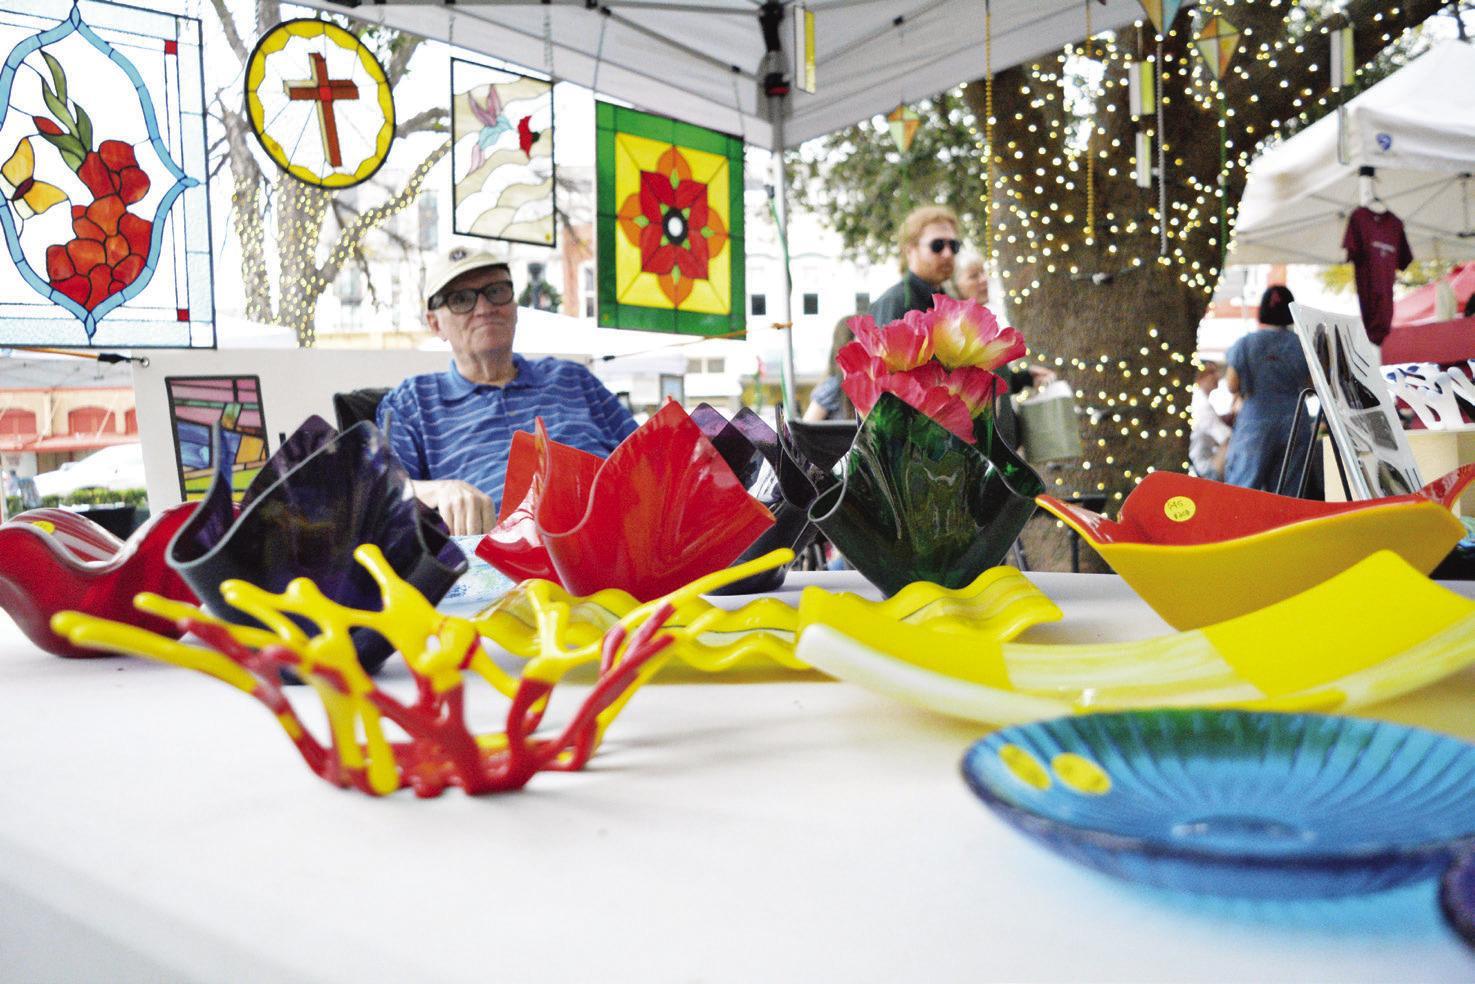 Art Squared returns to downtown San Marcos for 11th year in a row